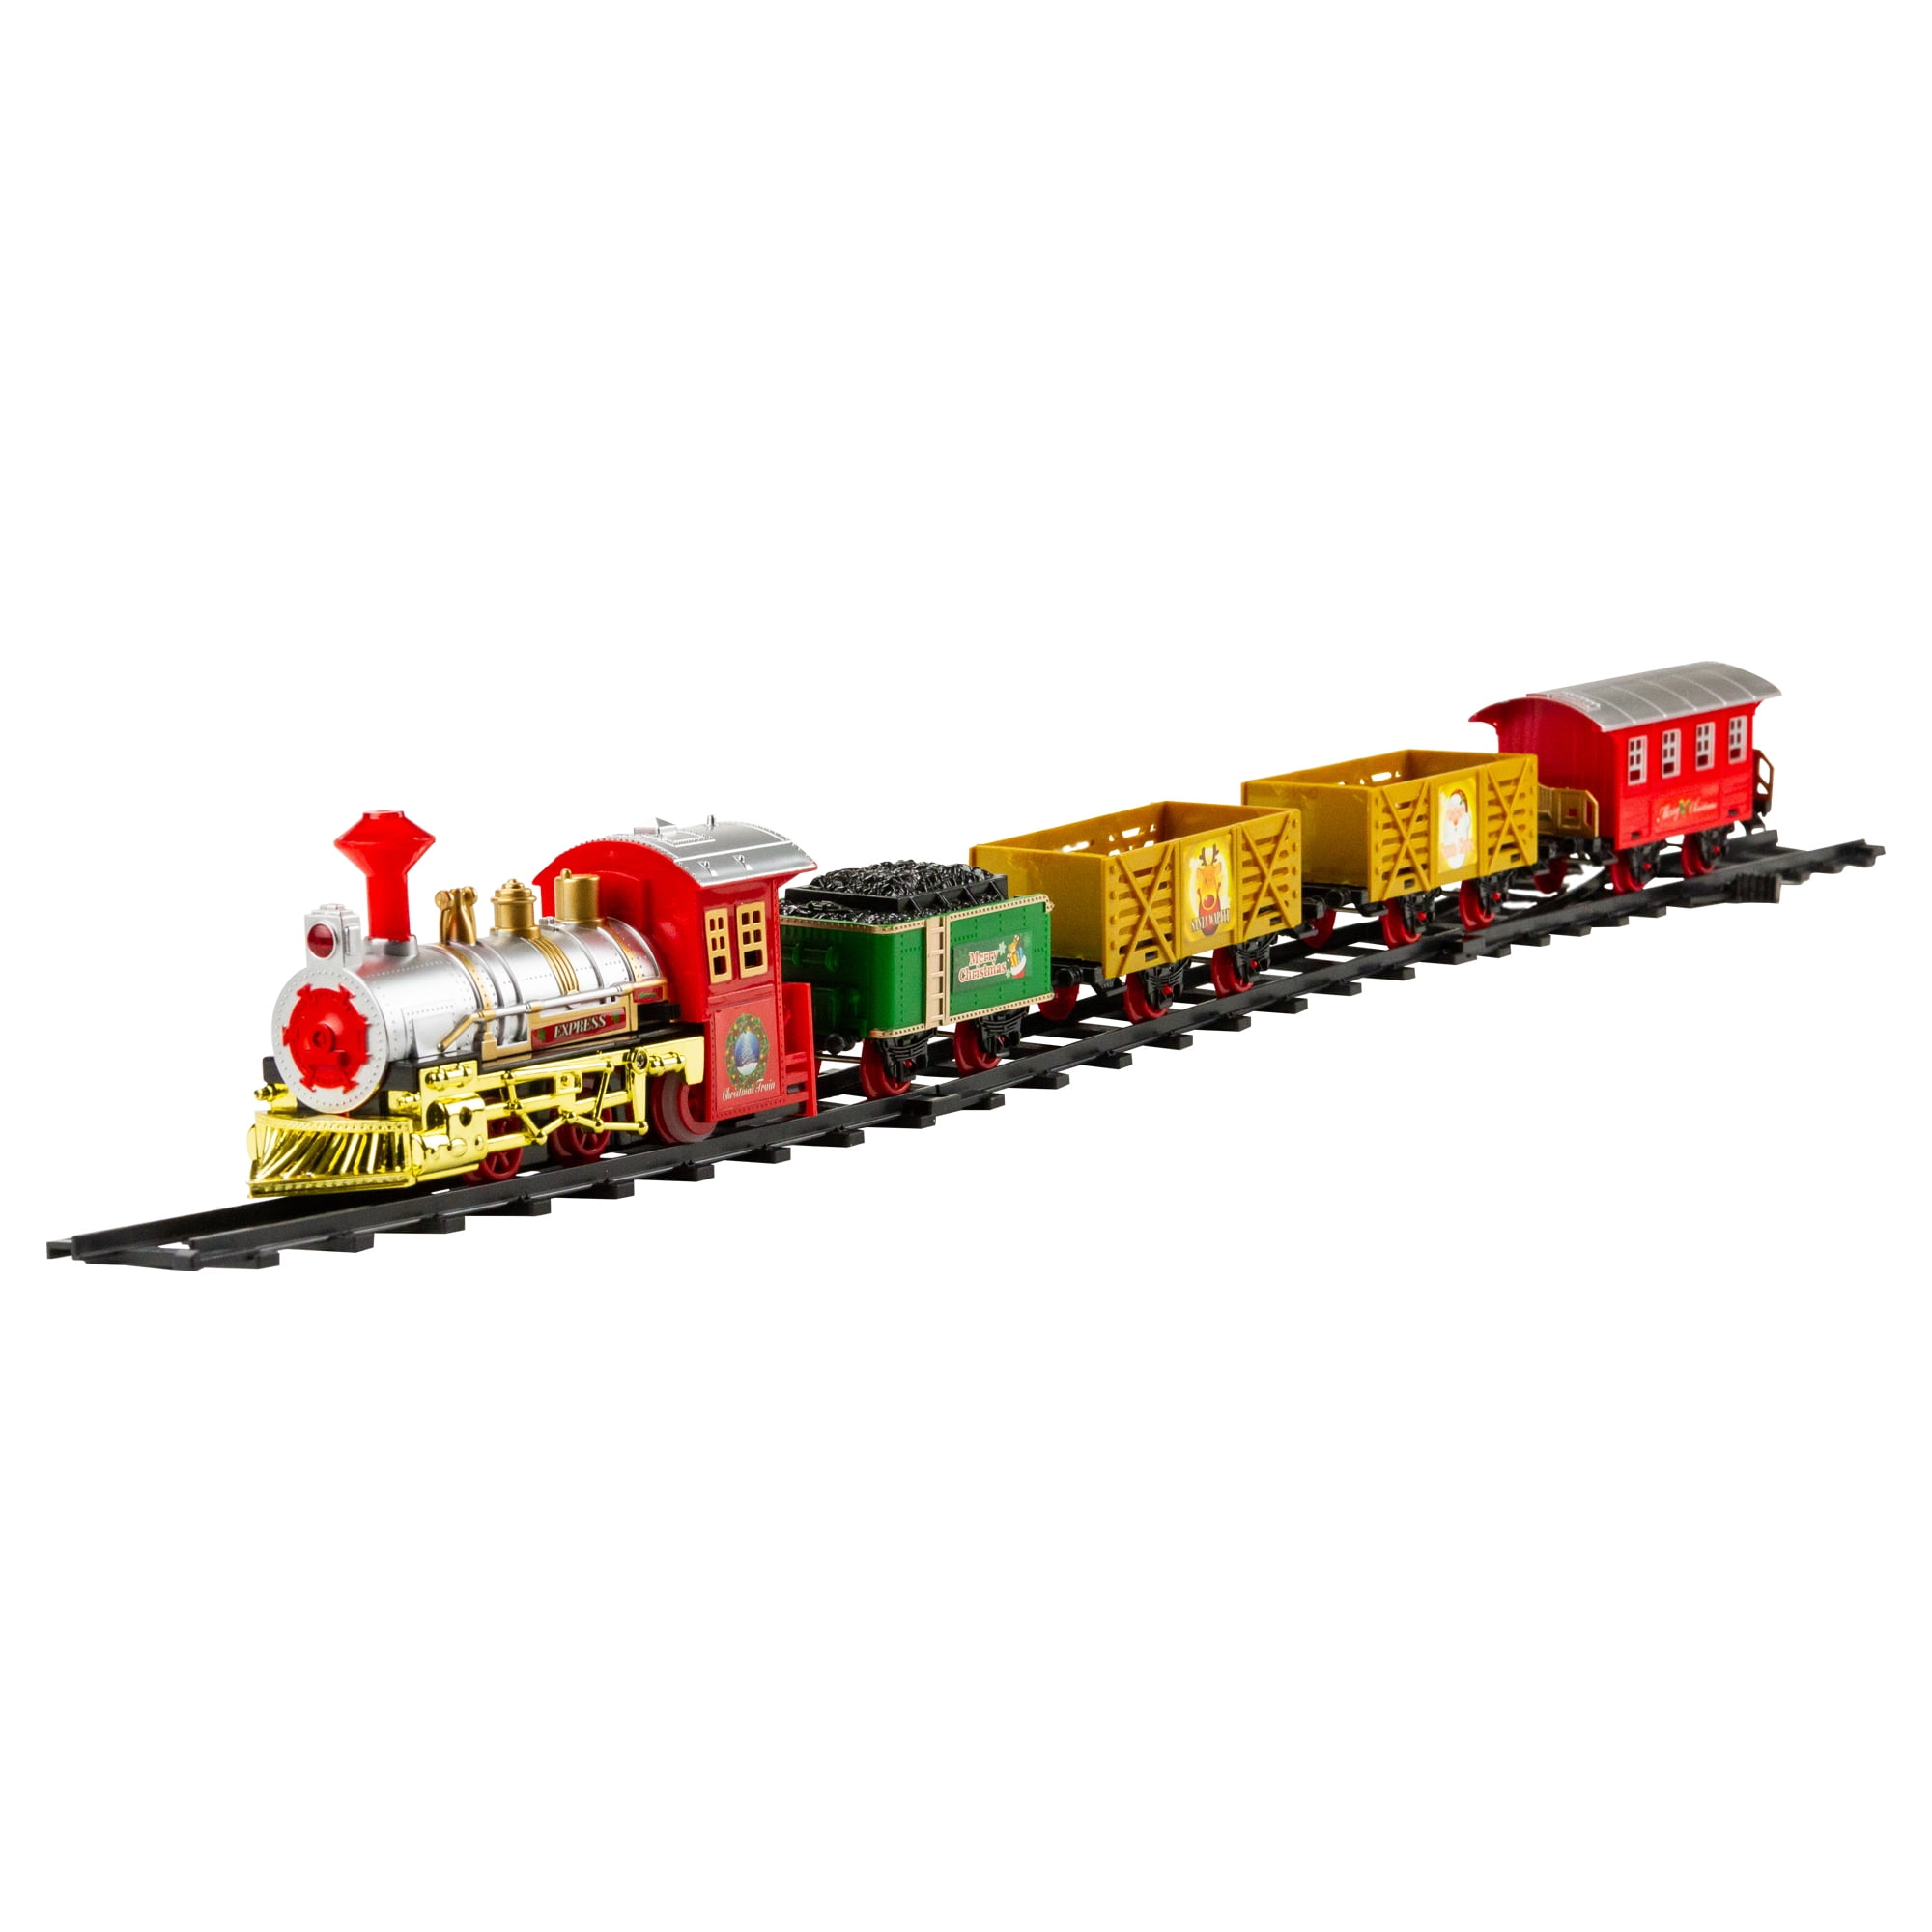 Details about   SANTA'S JUMBO EXPRESS TRAIN SET SOUND AND LIGHTS 